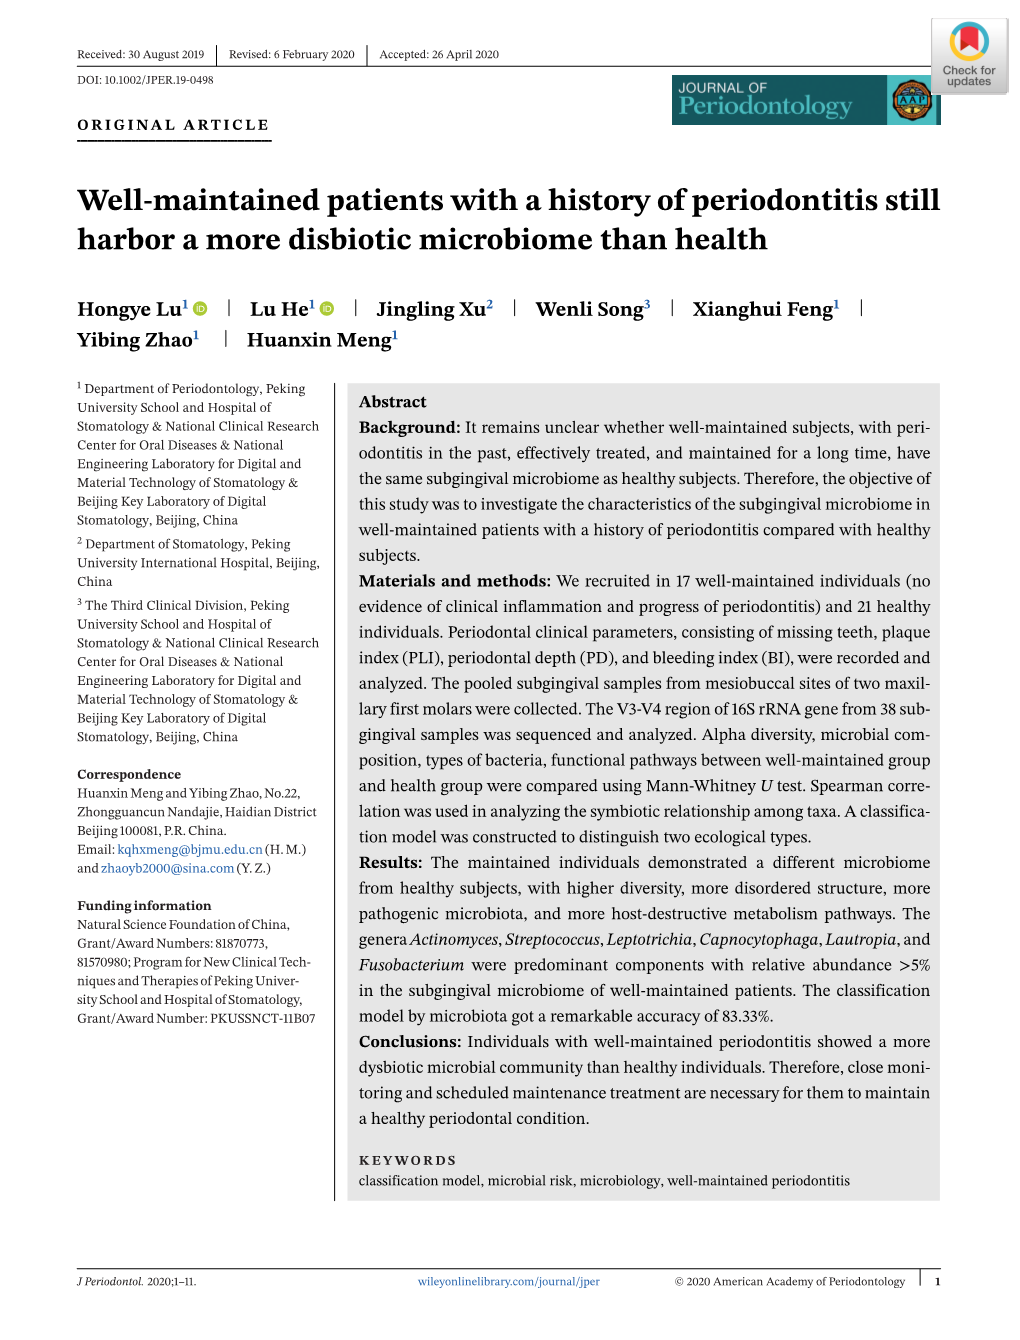 Well‐Maintained Patients with a History of Periodontitis Still Harbor A